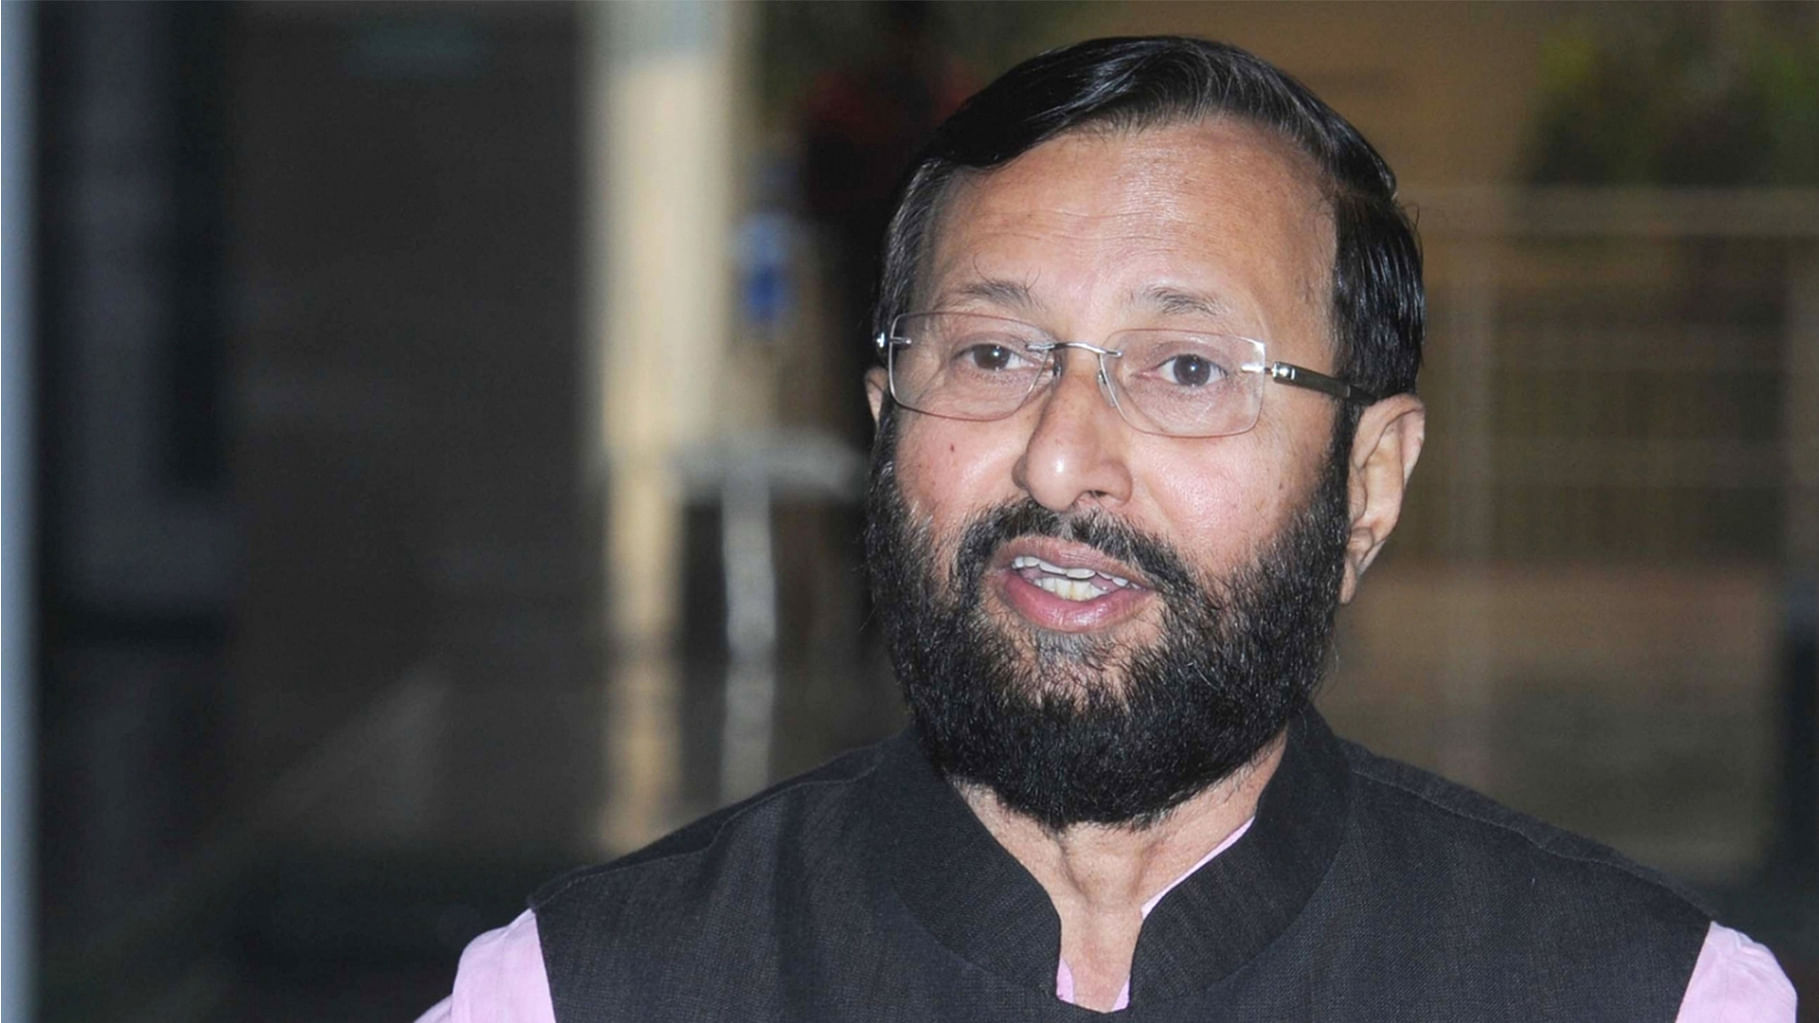 Union Minister of State for Environment, Forest and Climate
Change (Independent Charge) Prakash Javadekar. (Photo: IANS)